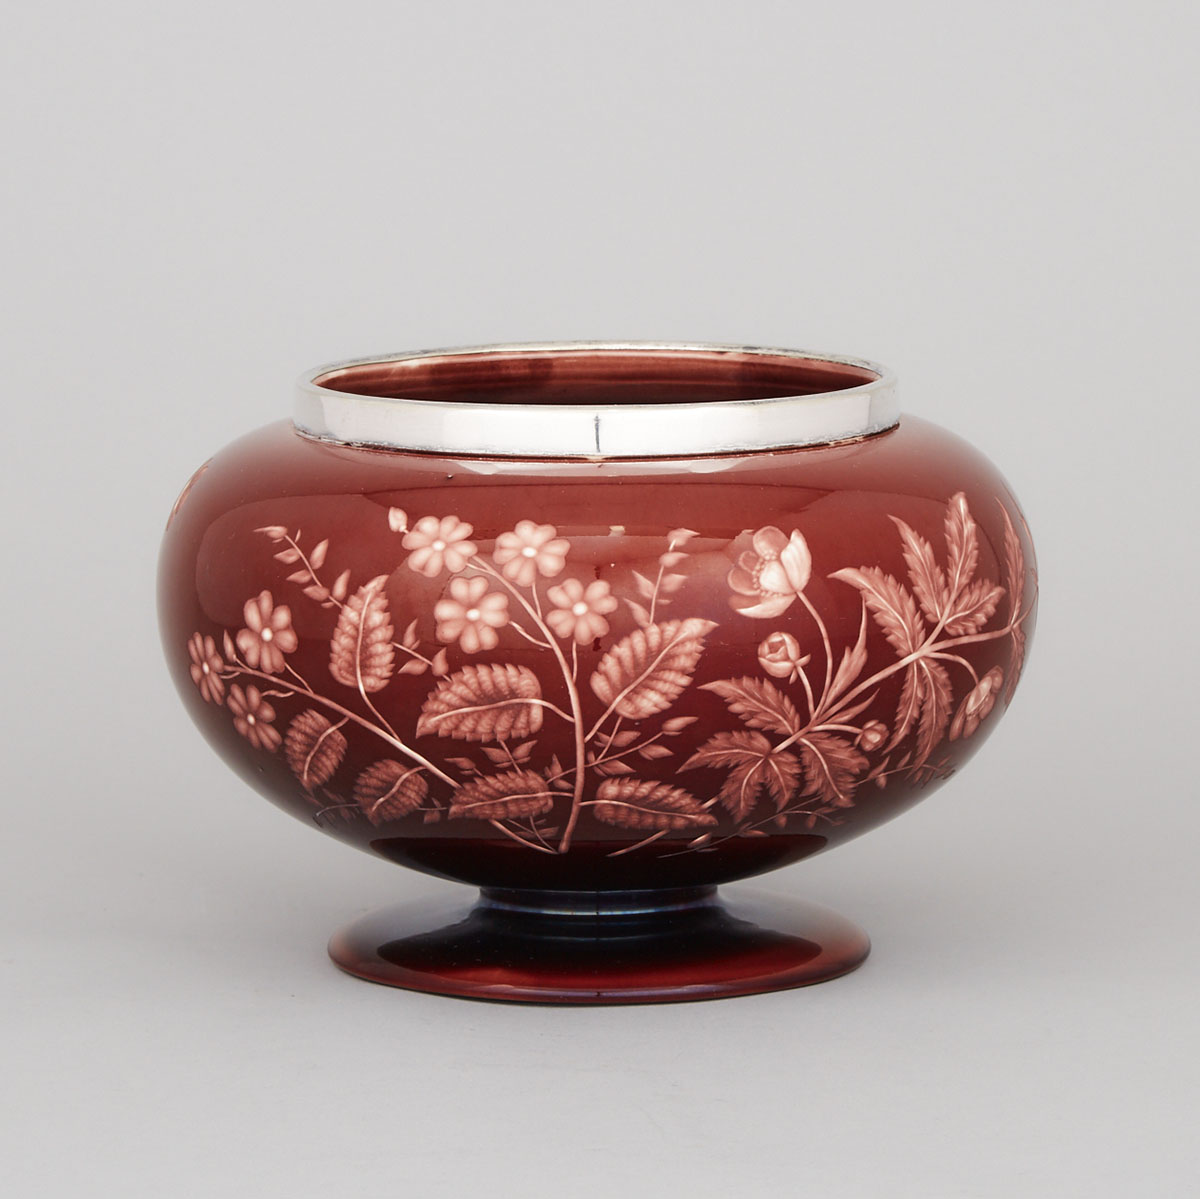 Wedgwood 'Vigornian Ware’ Etched Brown Glazed Footed Bowl, c.1880